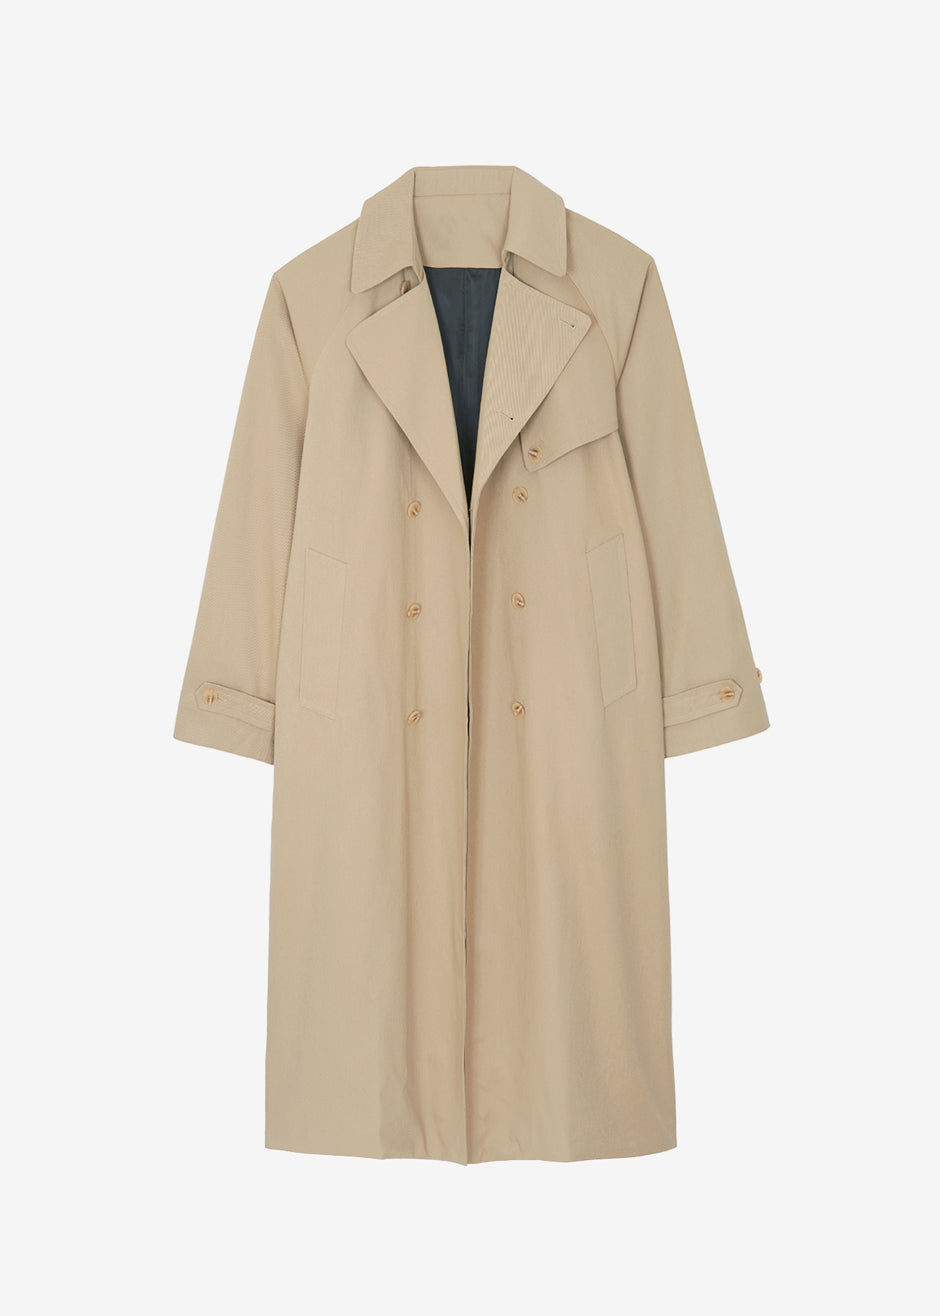 Umi Belted Trench Coat - Beige - 18